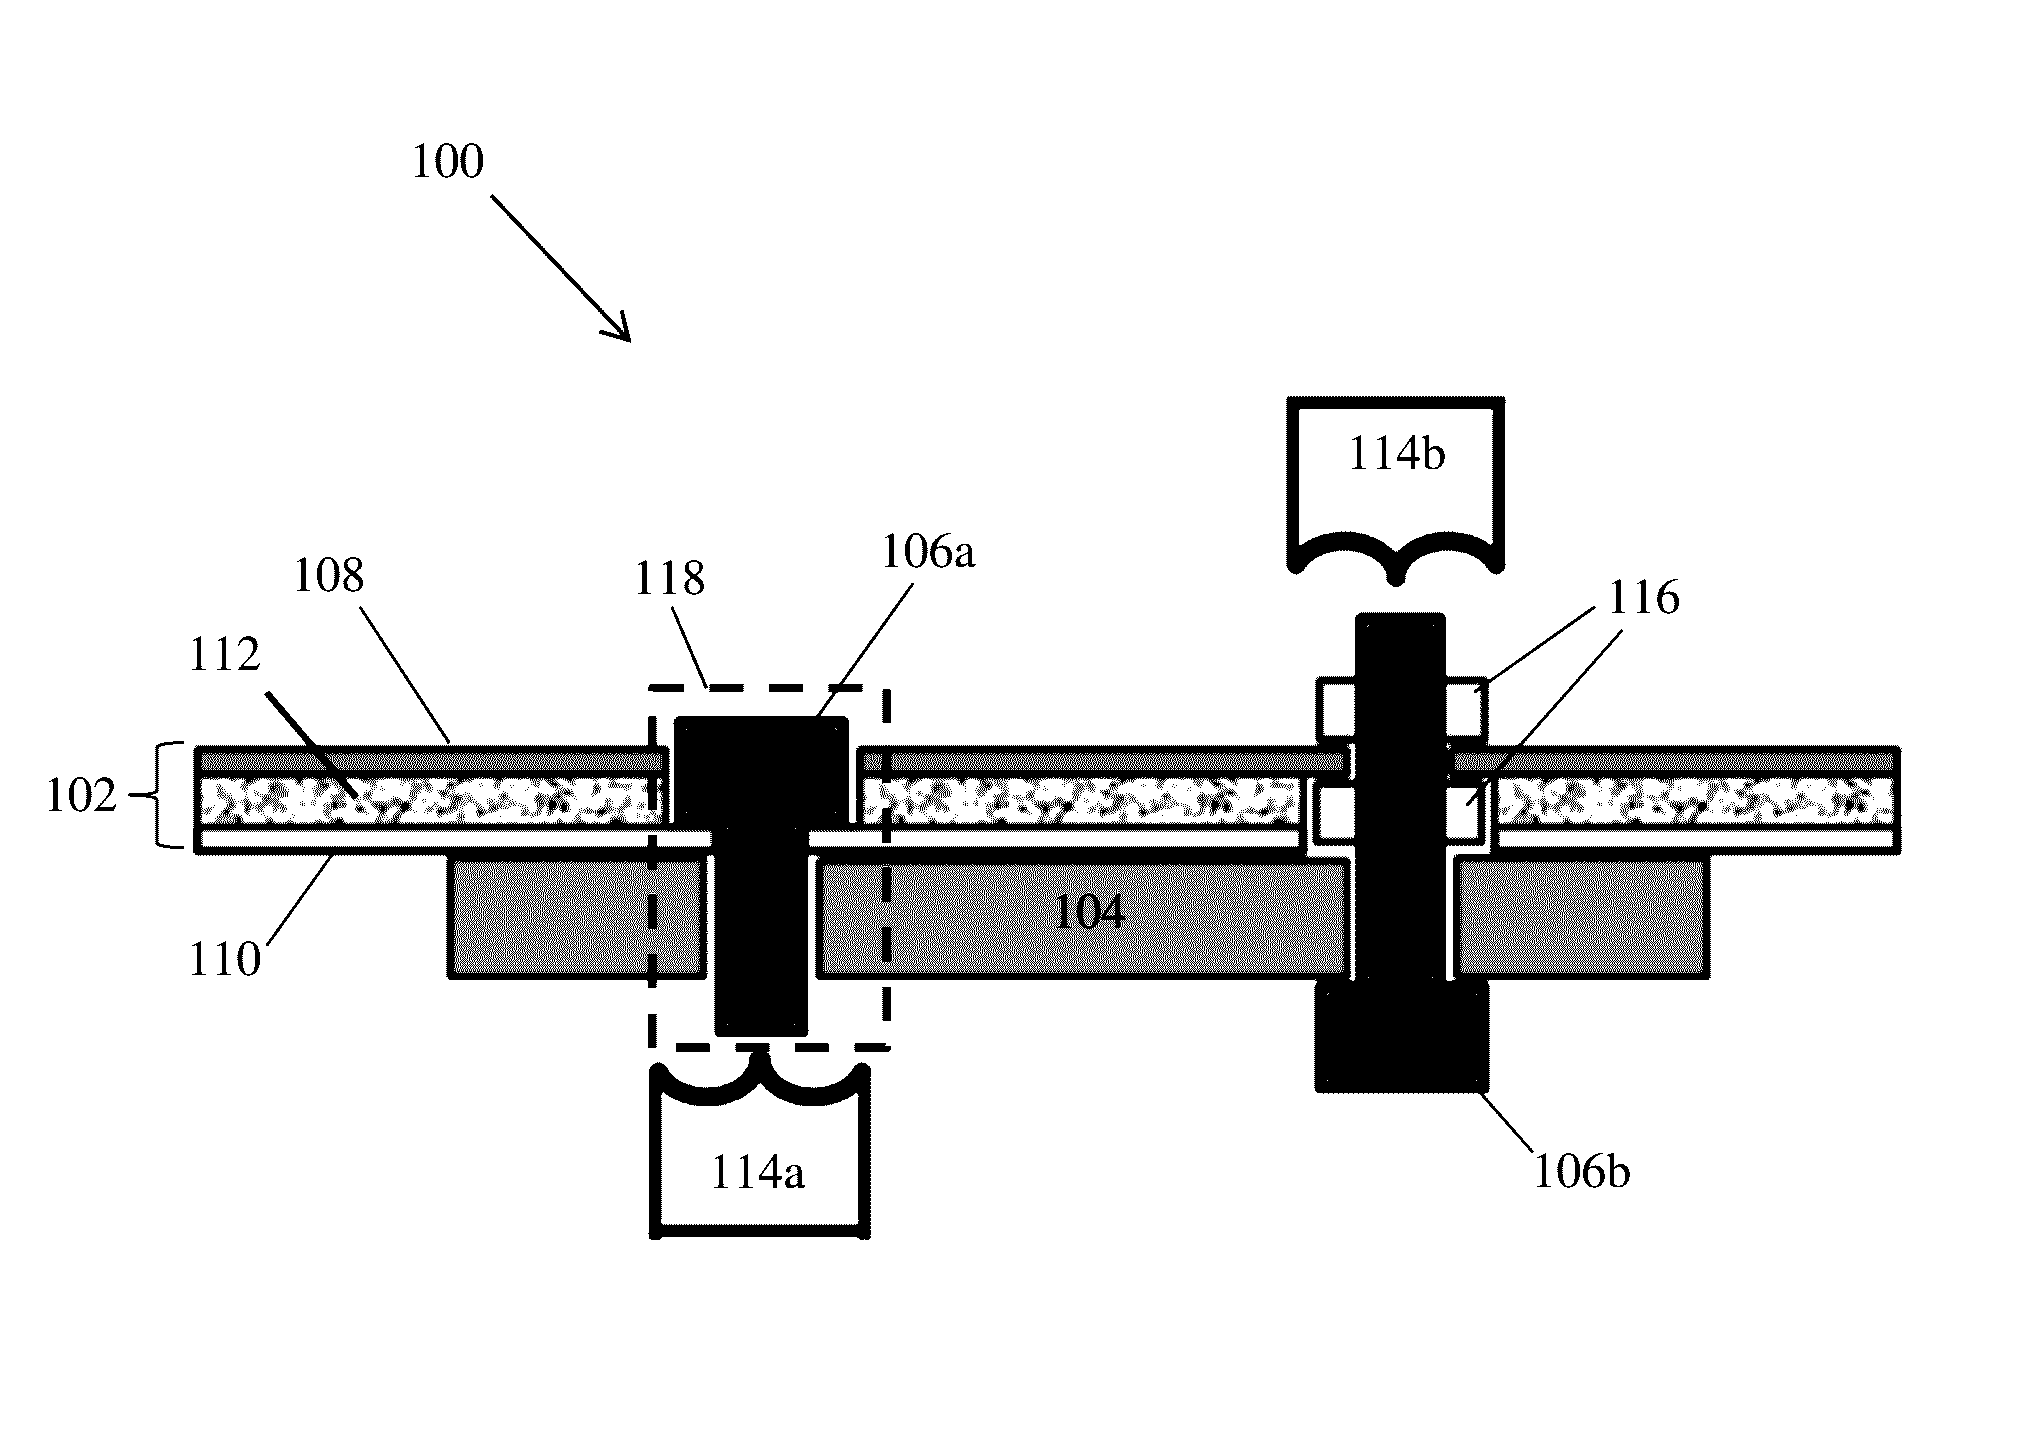 Method for mechnical and electrical connection to display electrodes